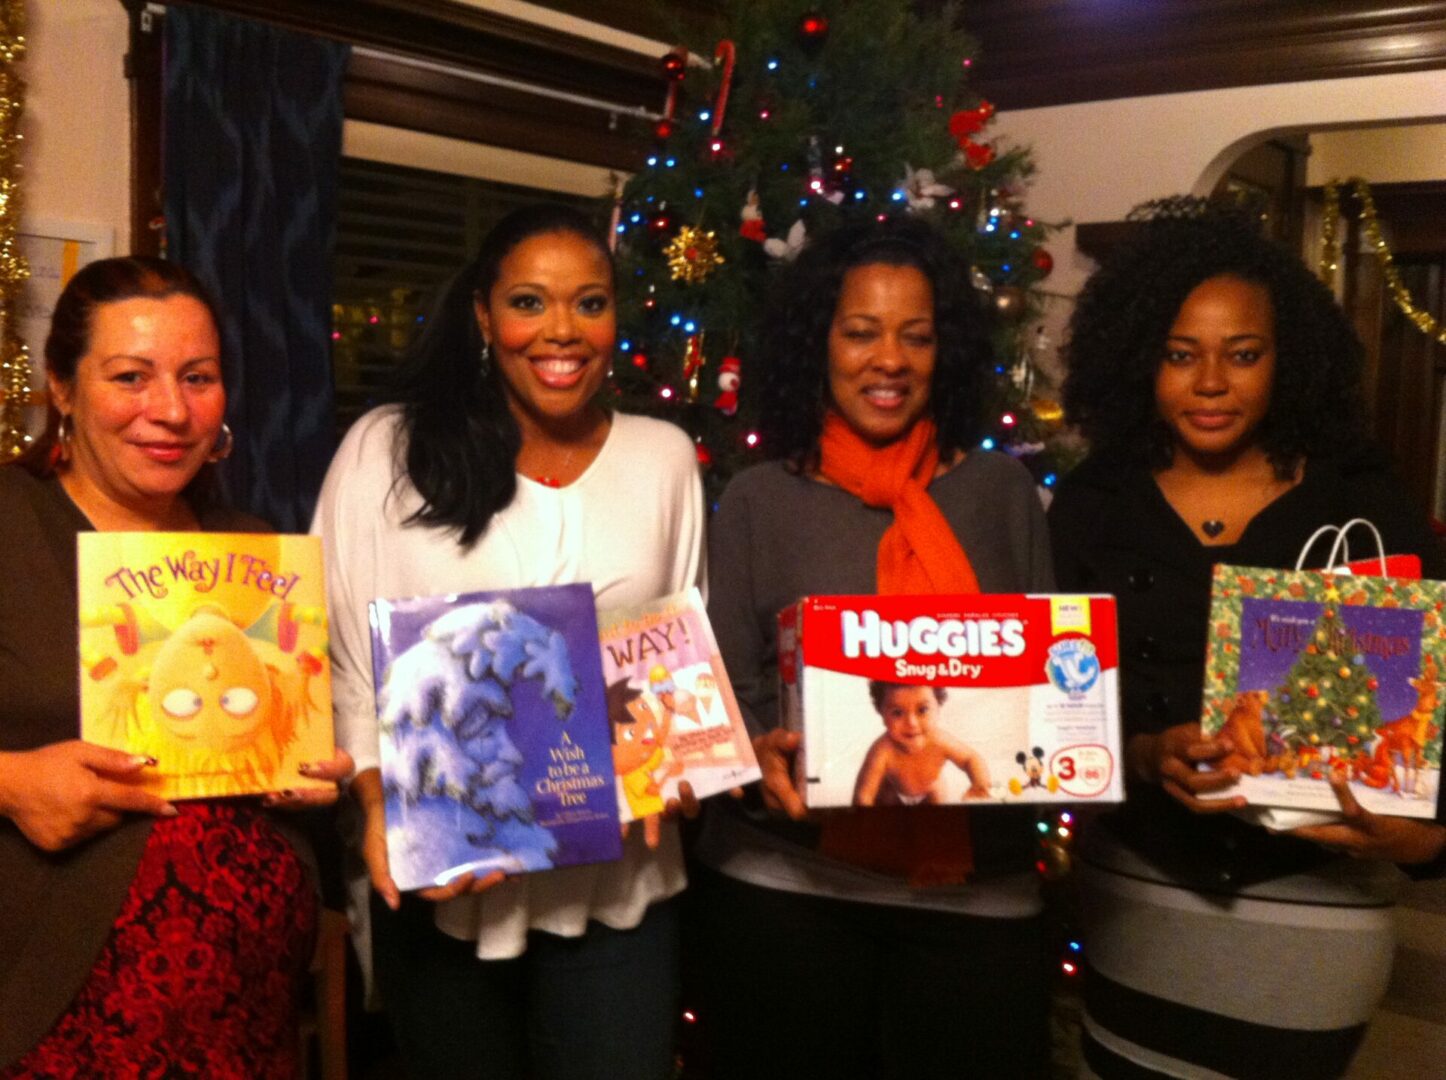 Four women posing with their gifts at a holiday event